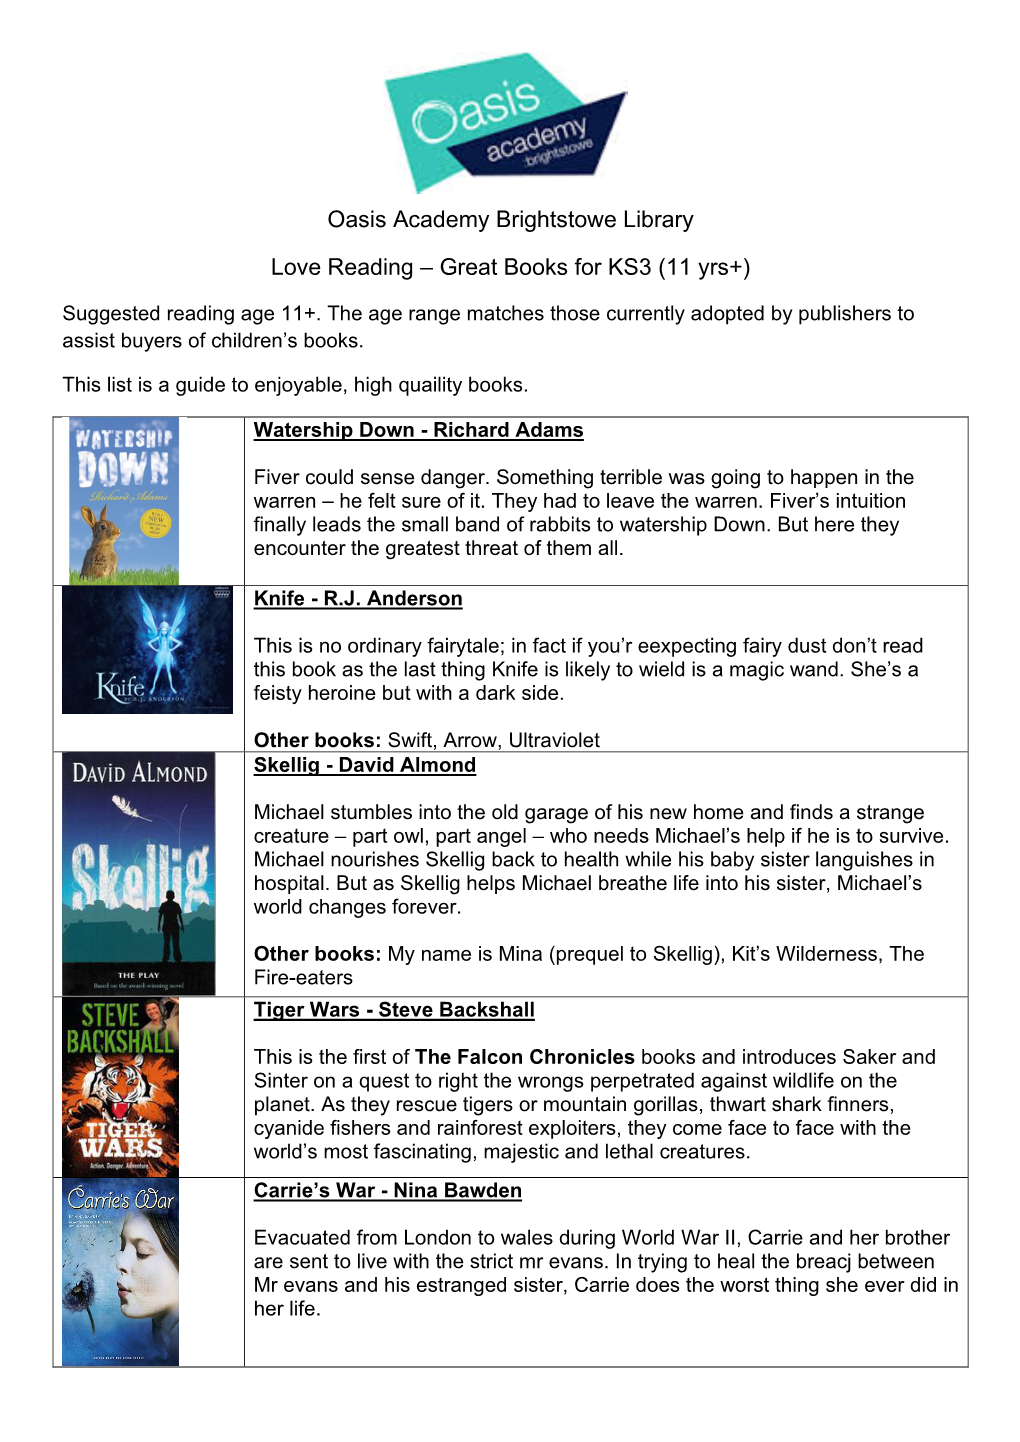 Oasis Academy Brightstowe Library Love Reading – Great Books For